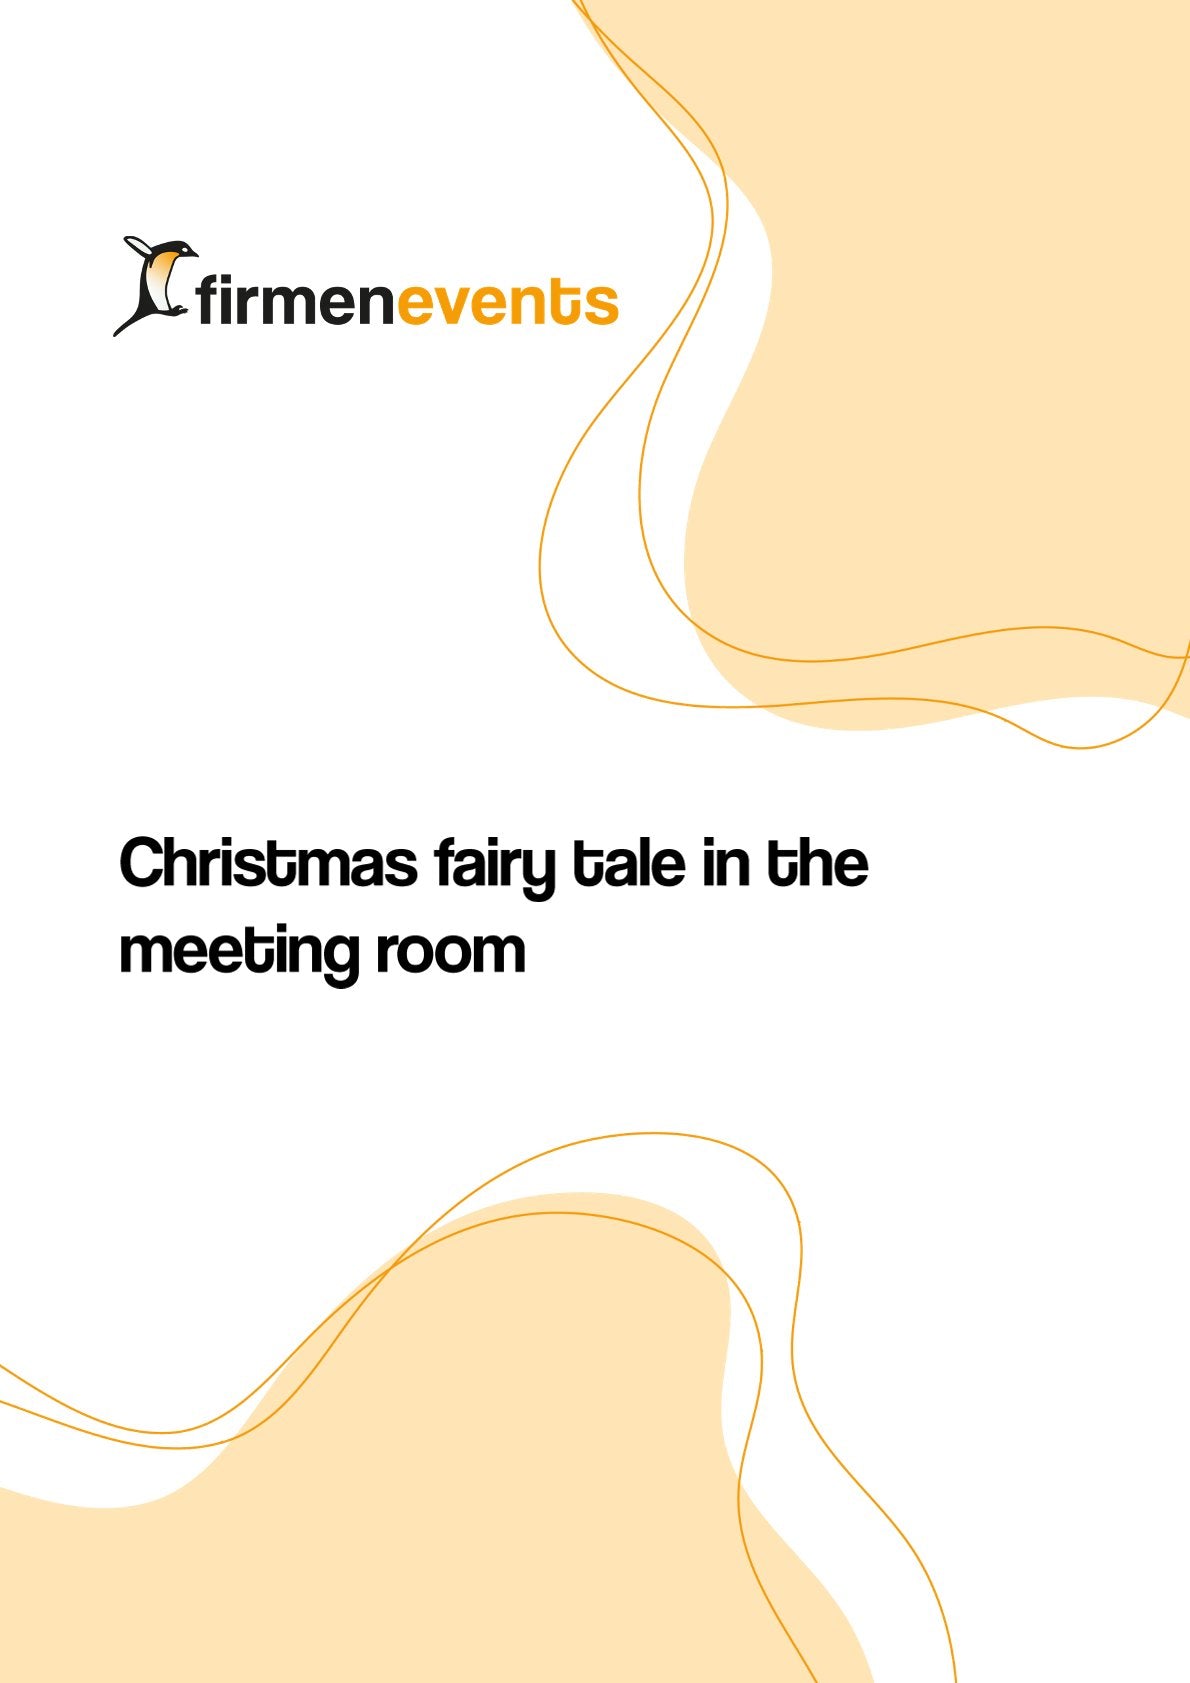 Christmas fairy tale in the meeting room